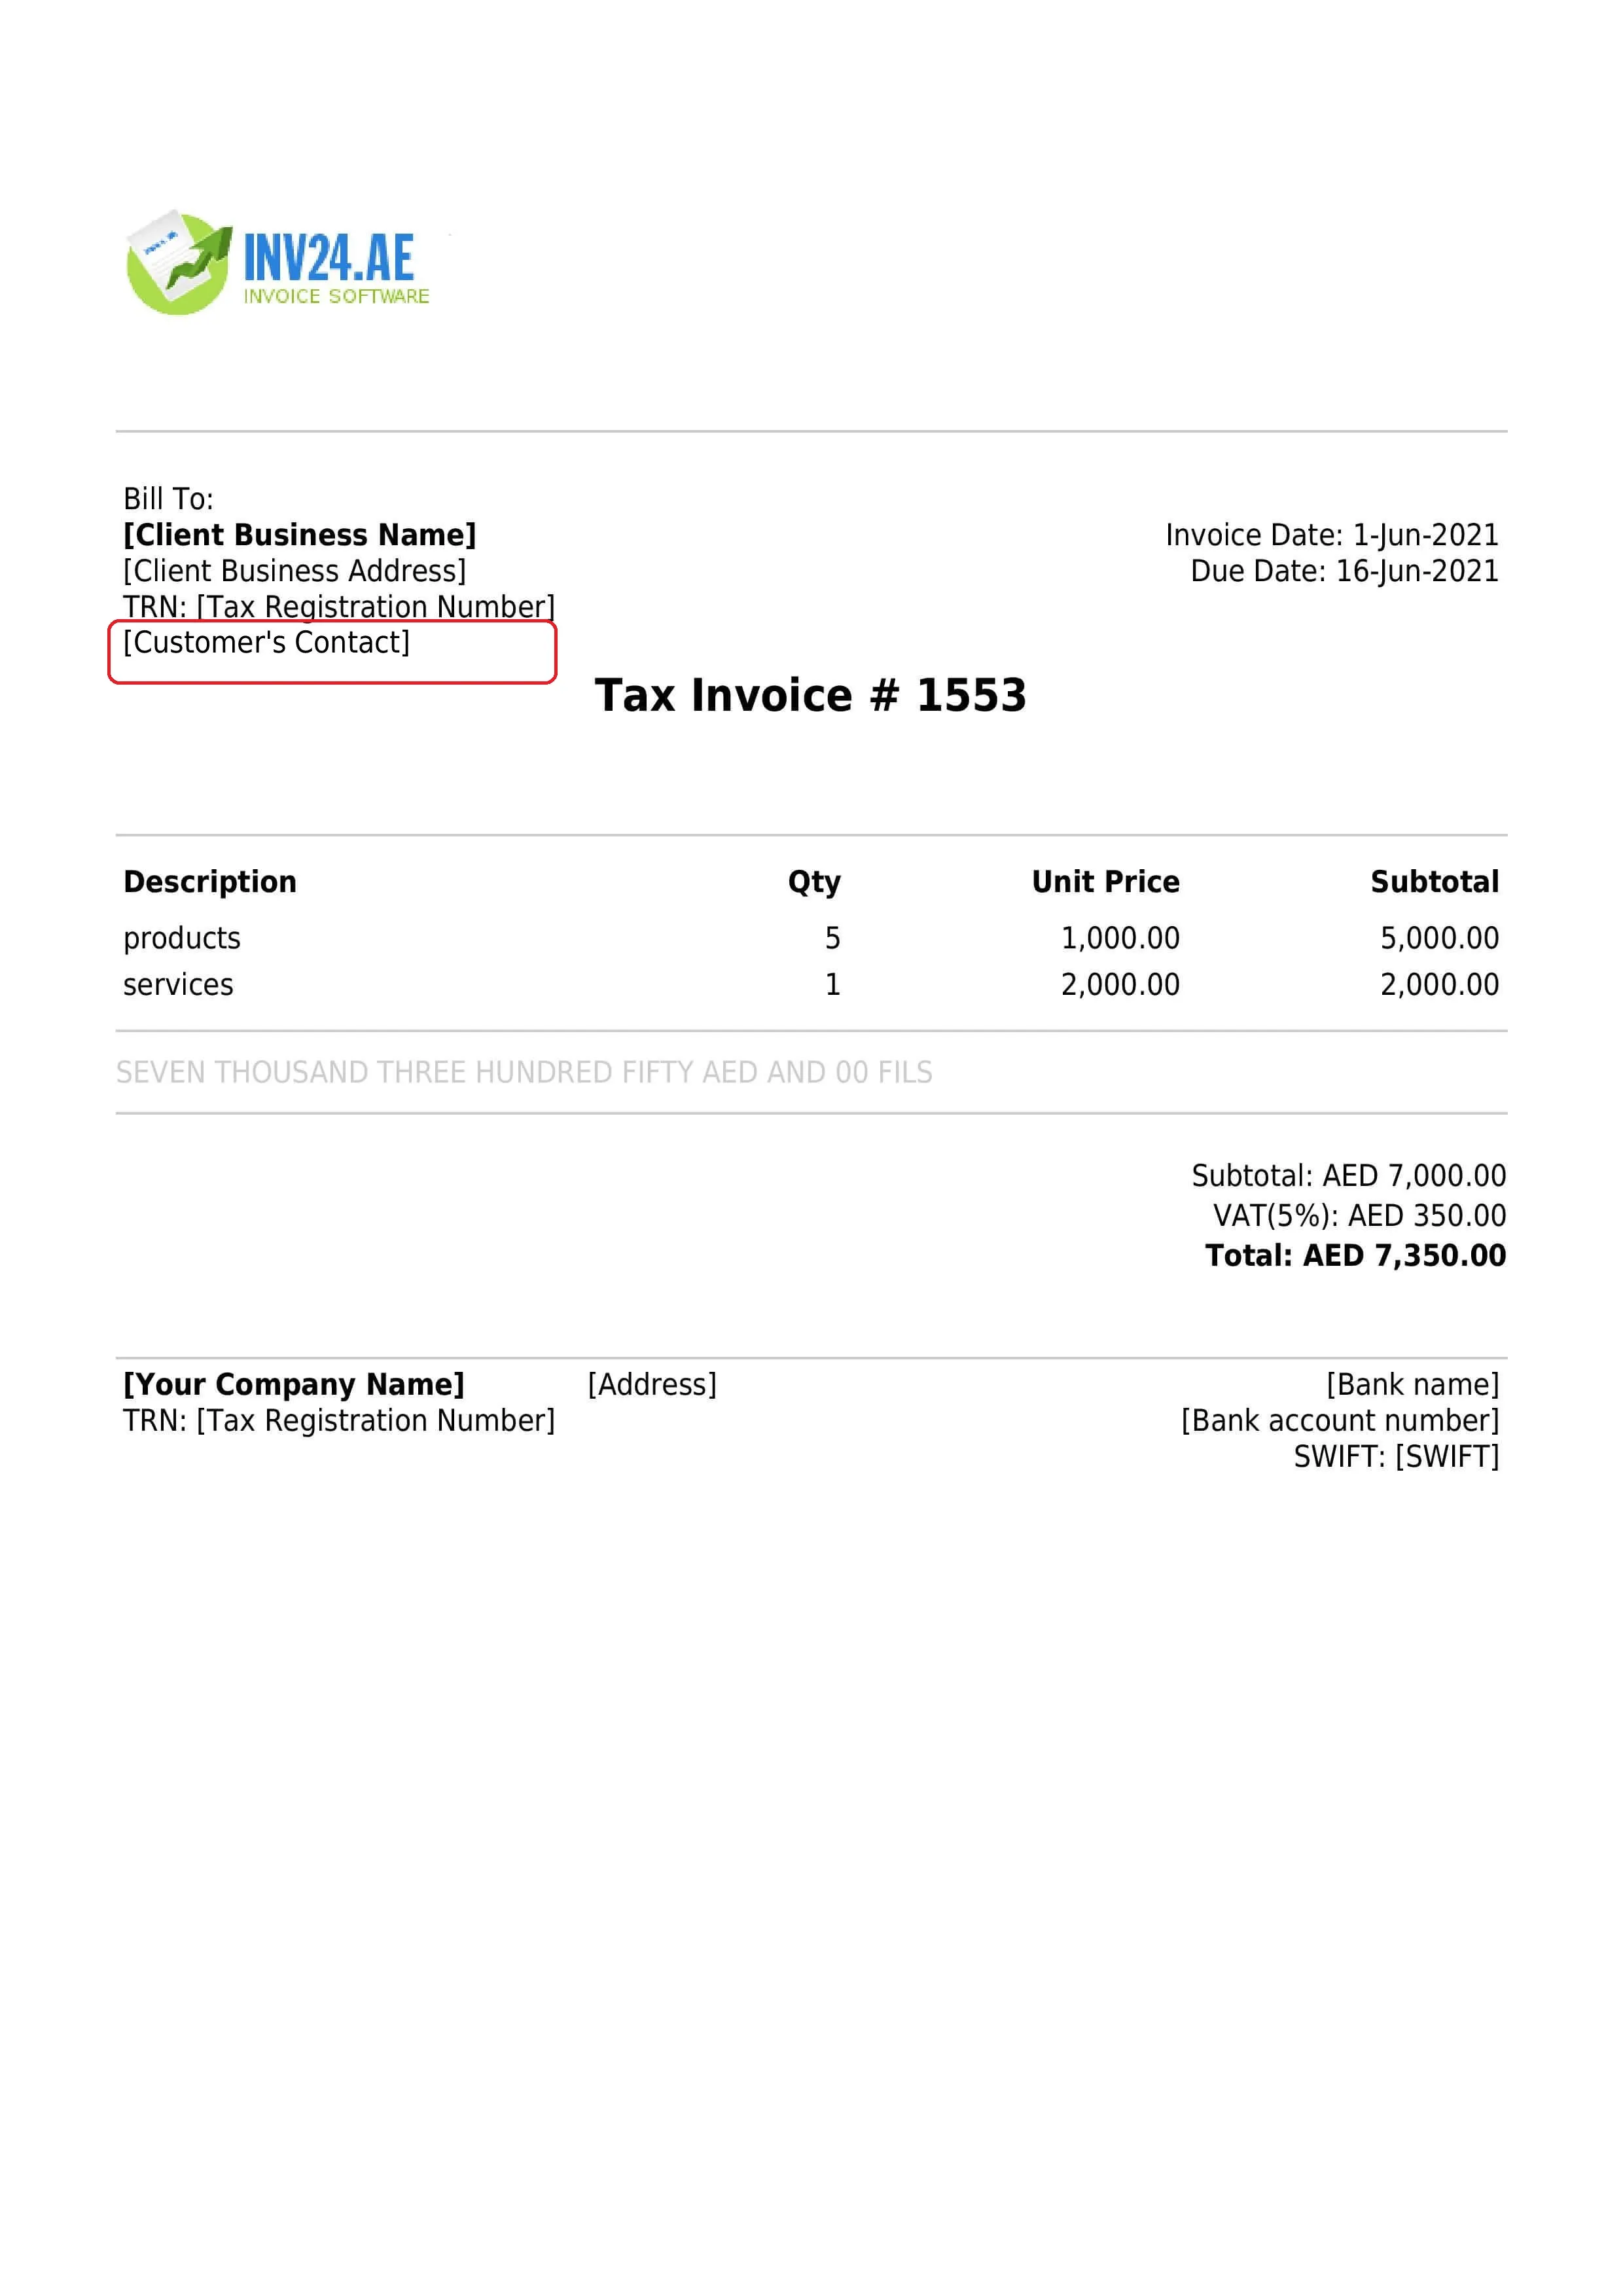 customer's contact details on the invoice